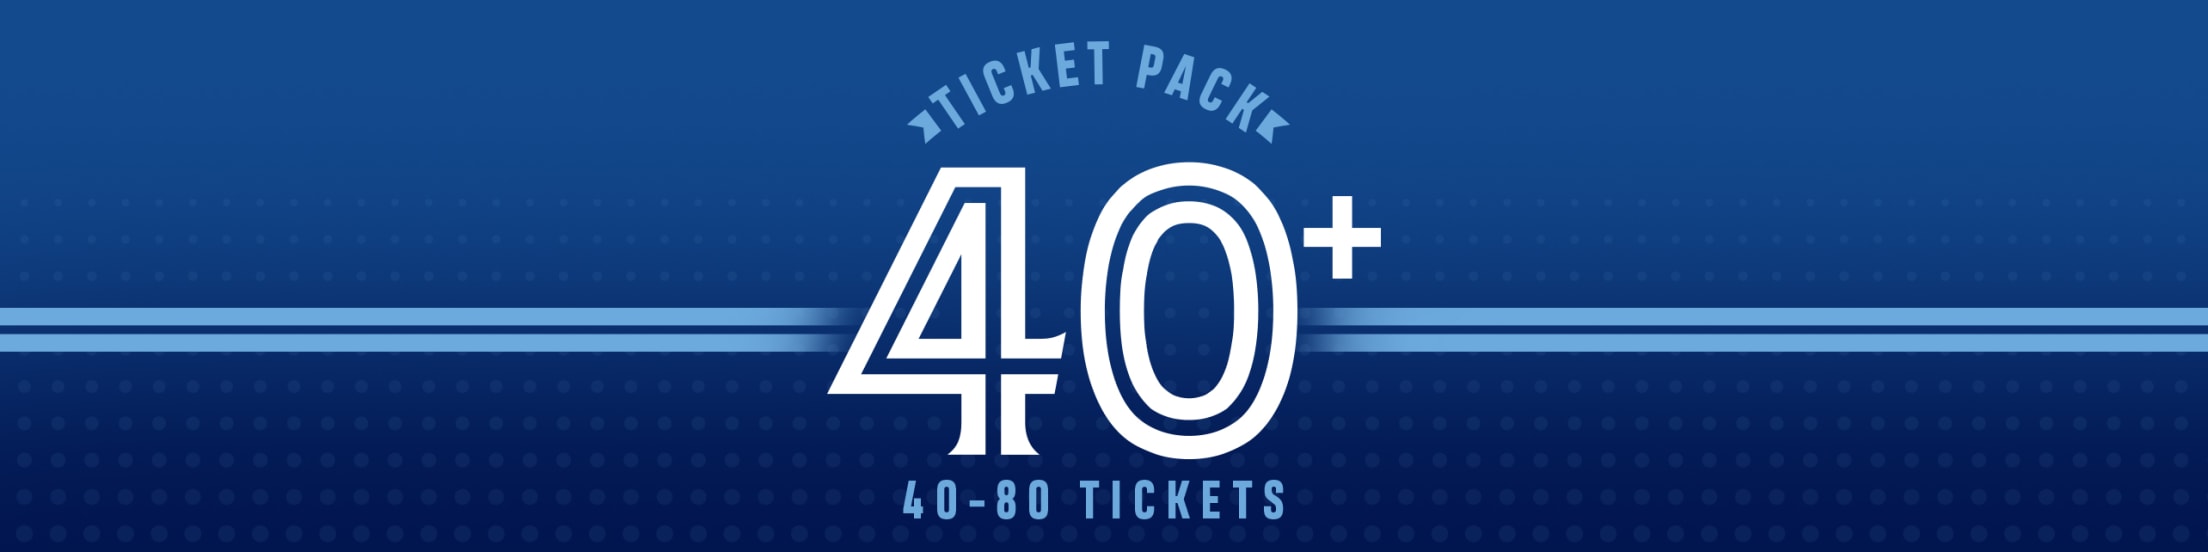 2020 Blue Jays Tickets: Flexible Ticket Packs, Seating Map, Game